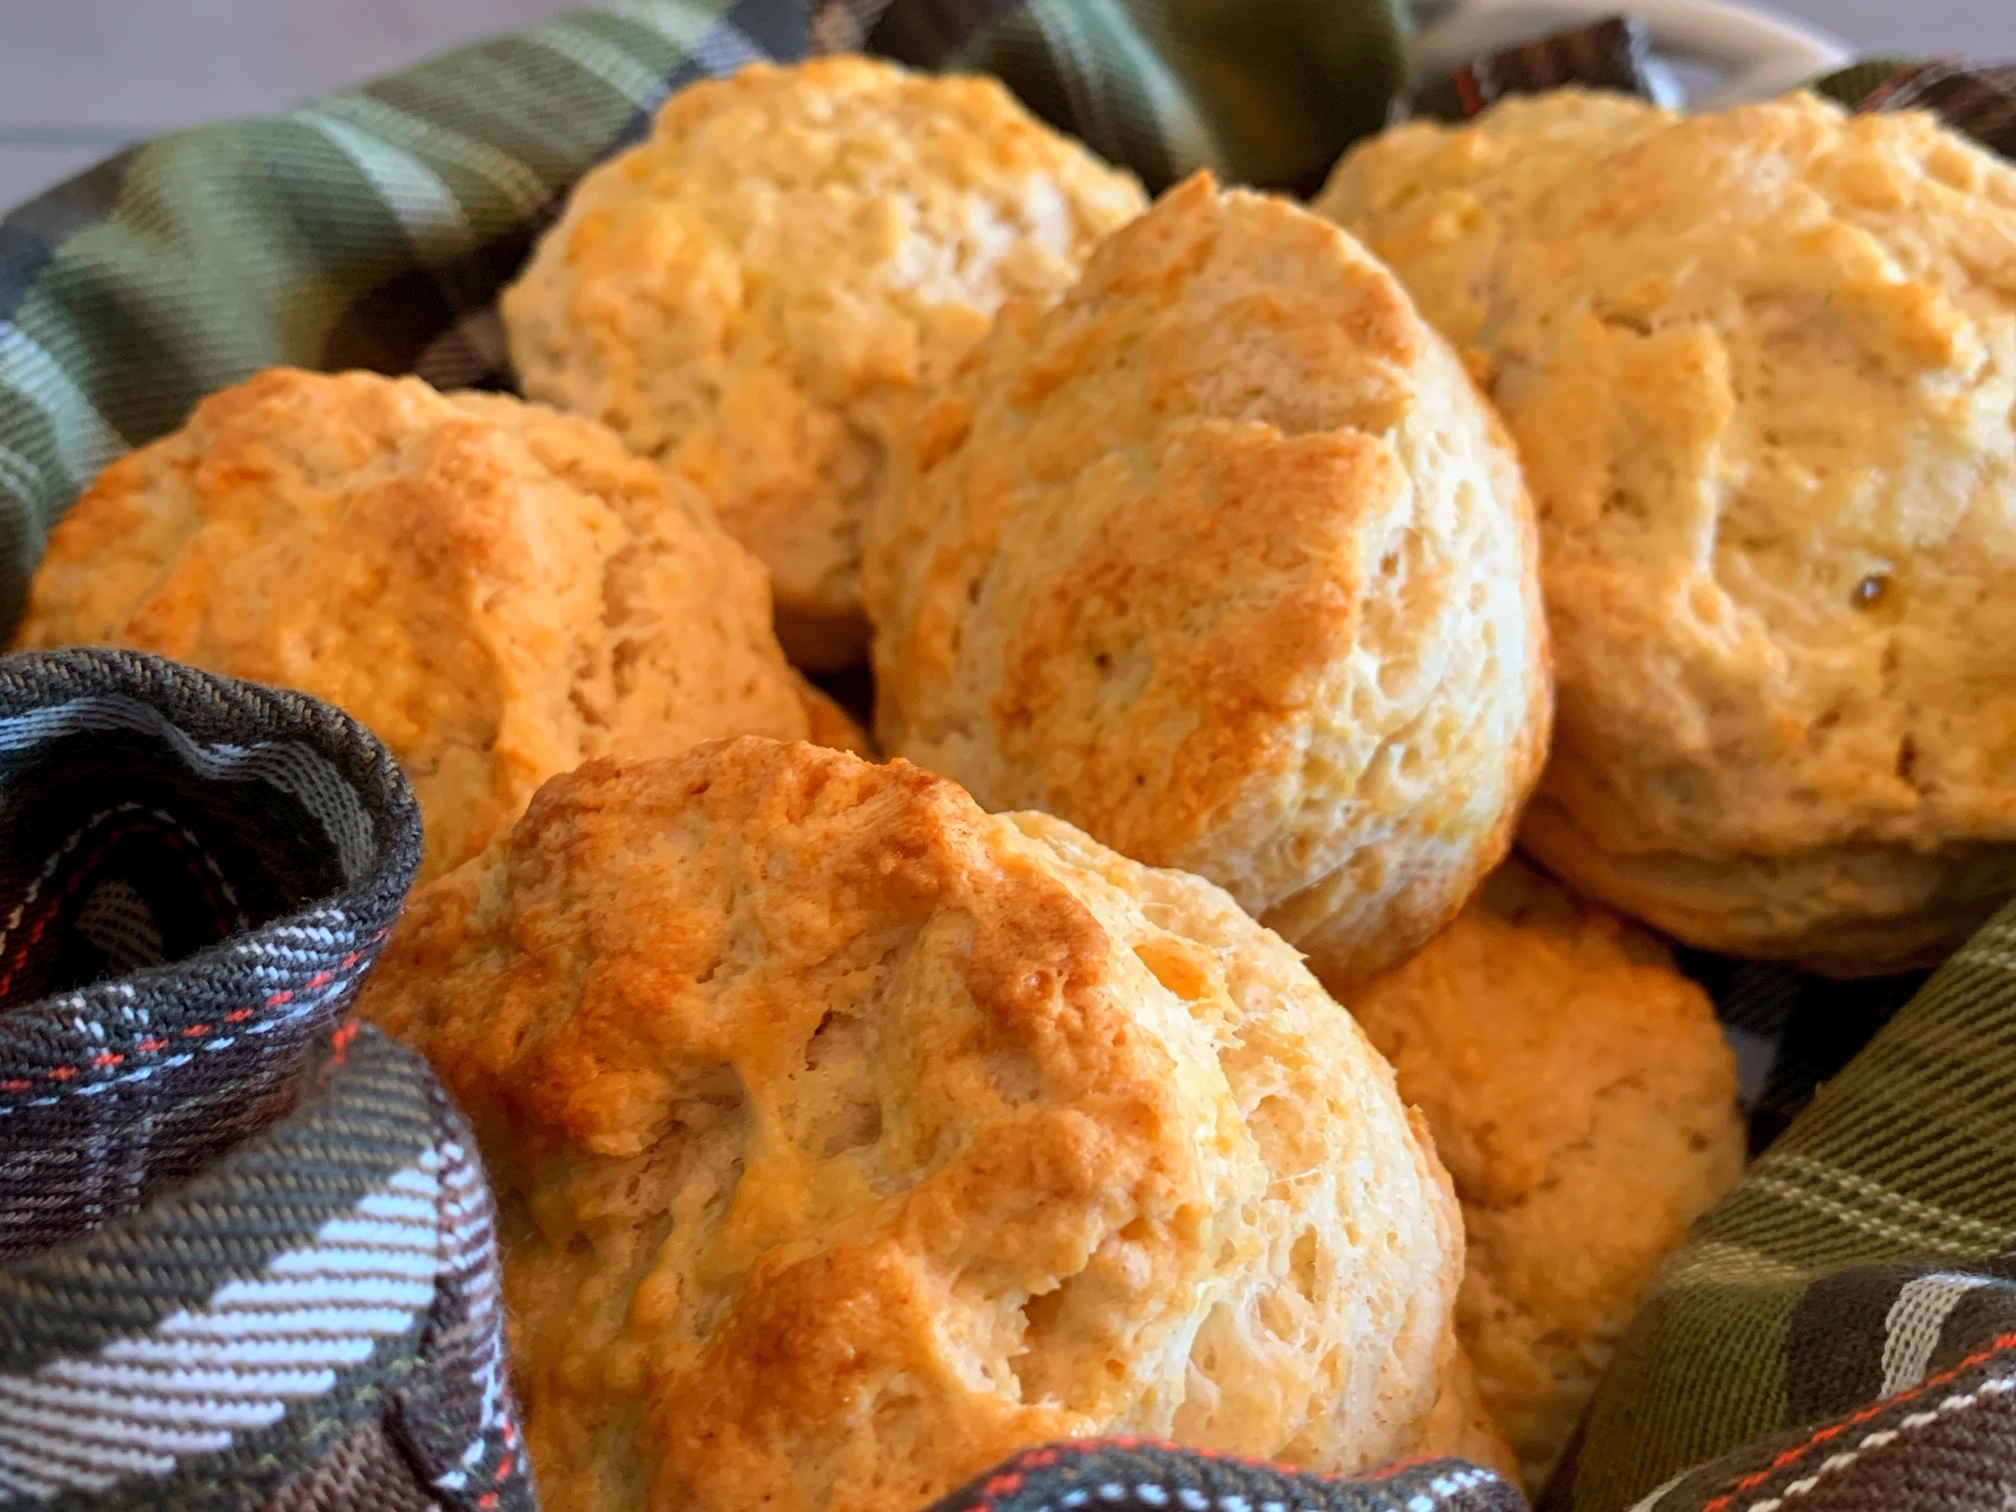 Buttermilk Biscuits, Easy Buttermilk Biscuits, Southern Buttermilk Biscuits, Breakfast Recipe, Baking, Old Fashioned Biscuits